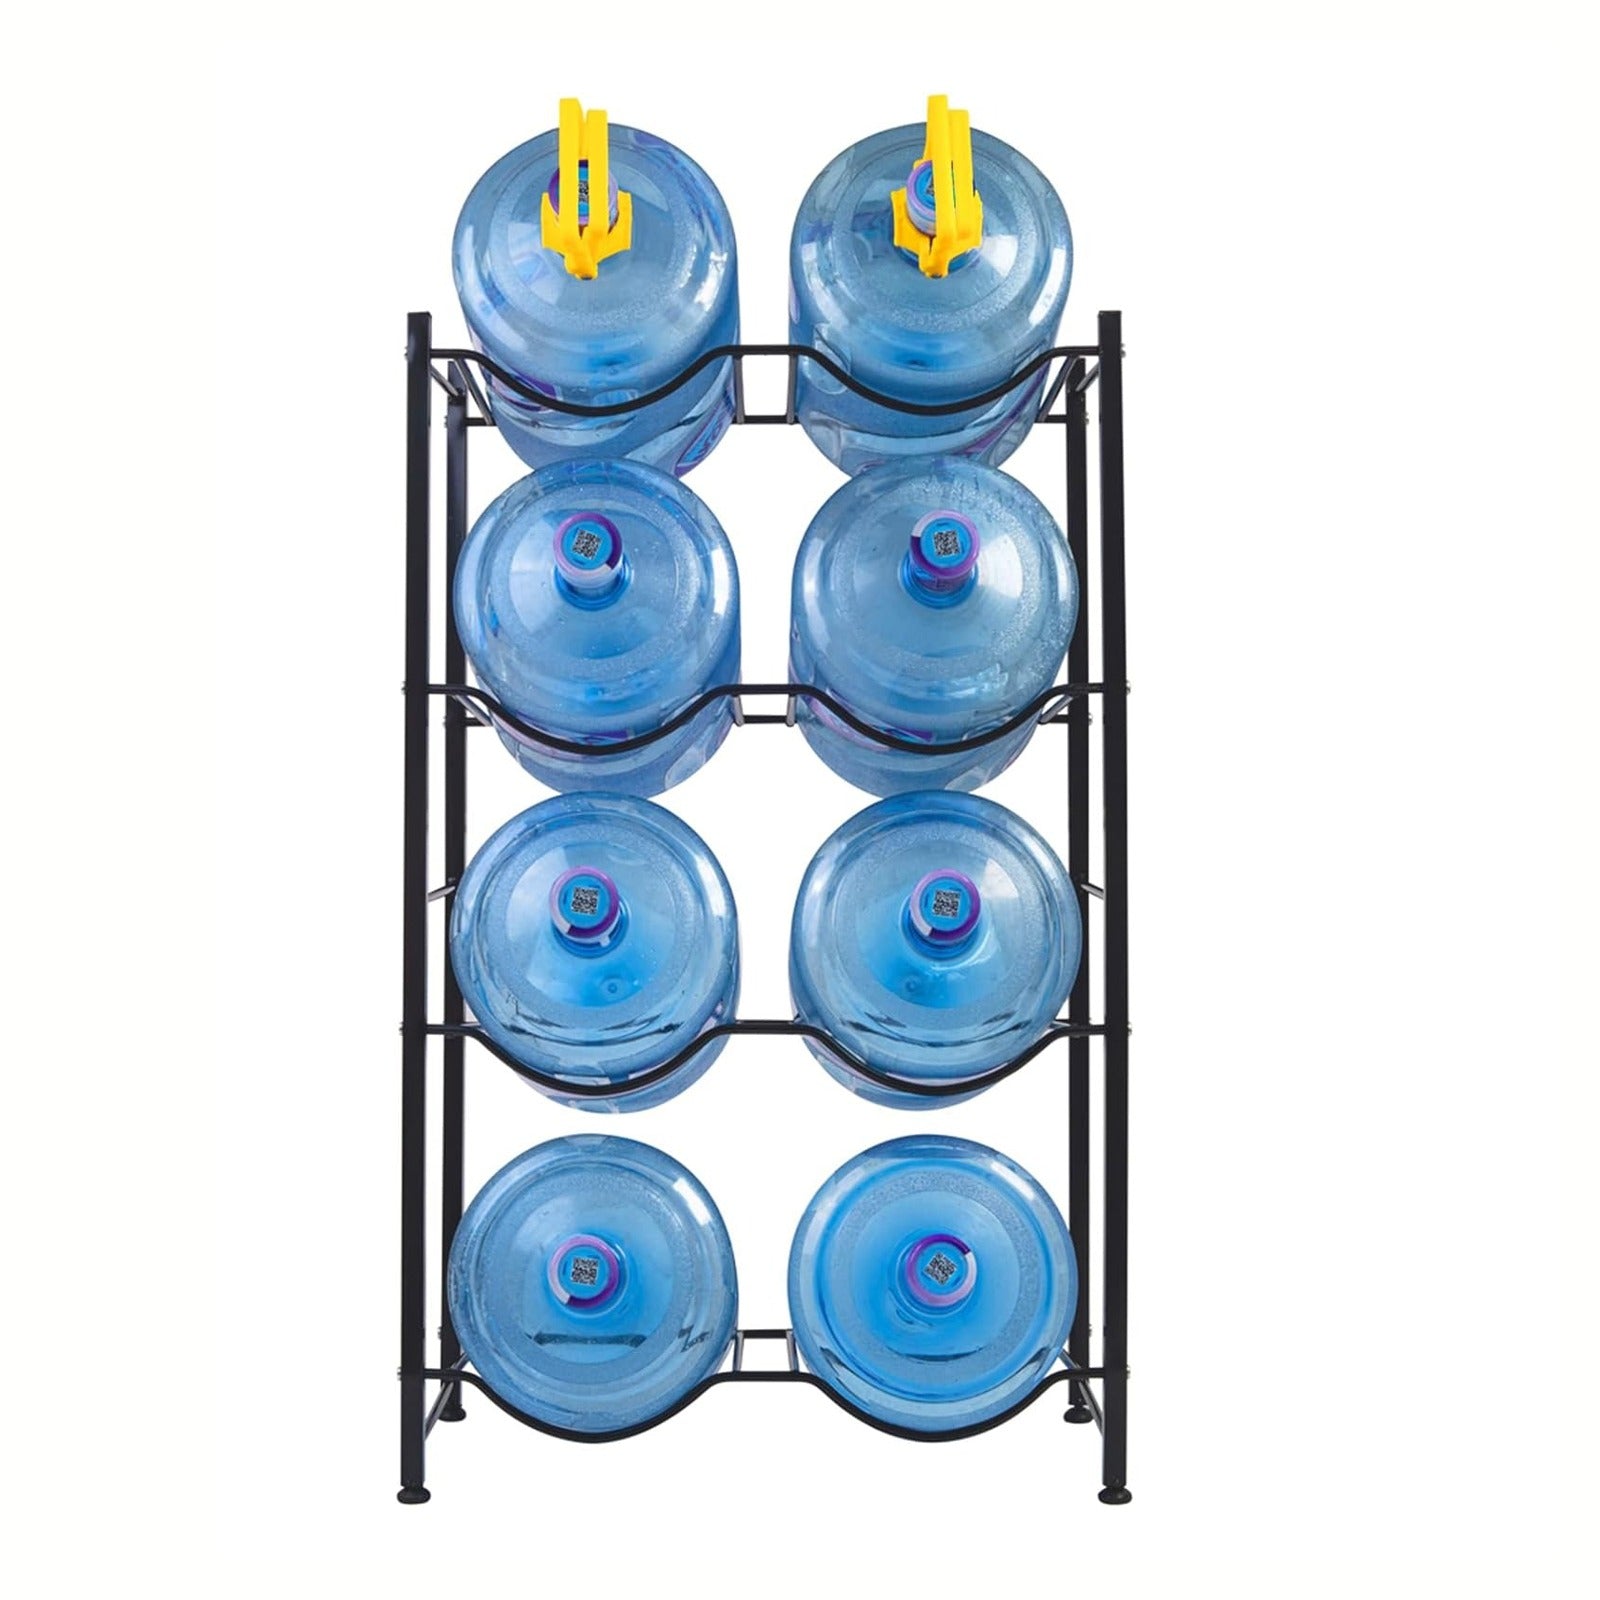 5 Gallon Water Bottle Stand arranged with some bottles